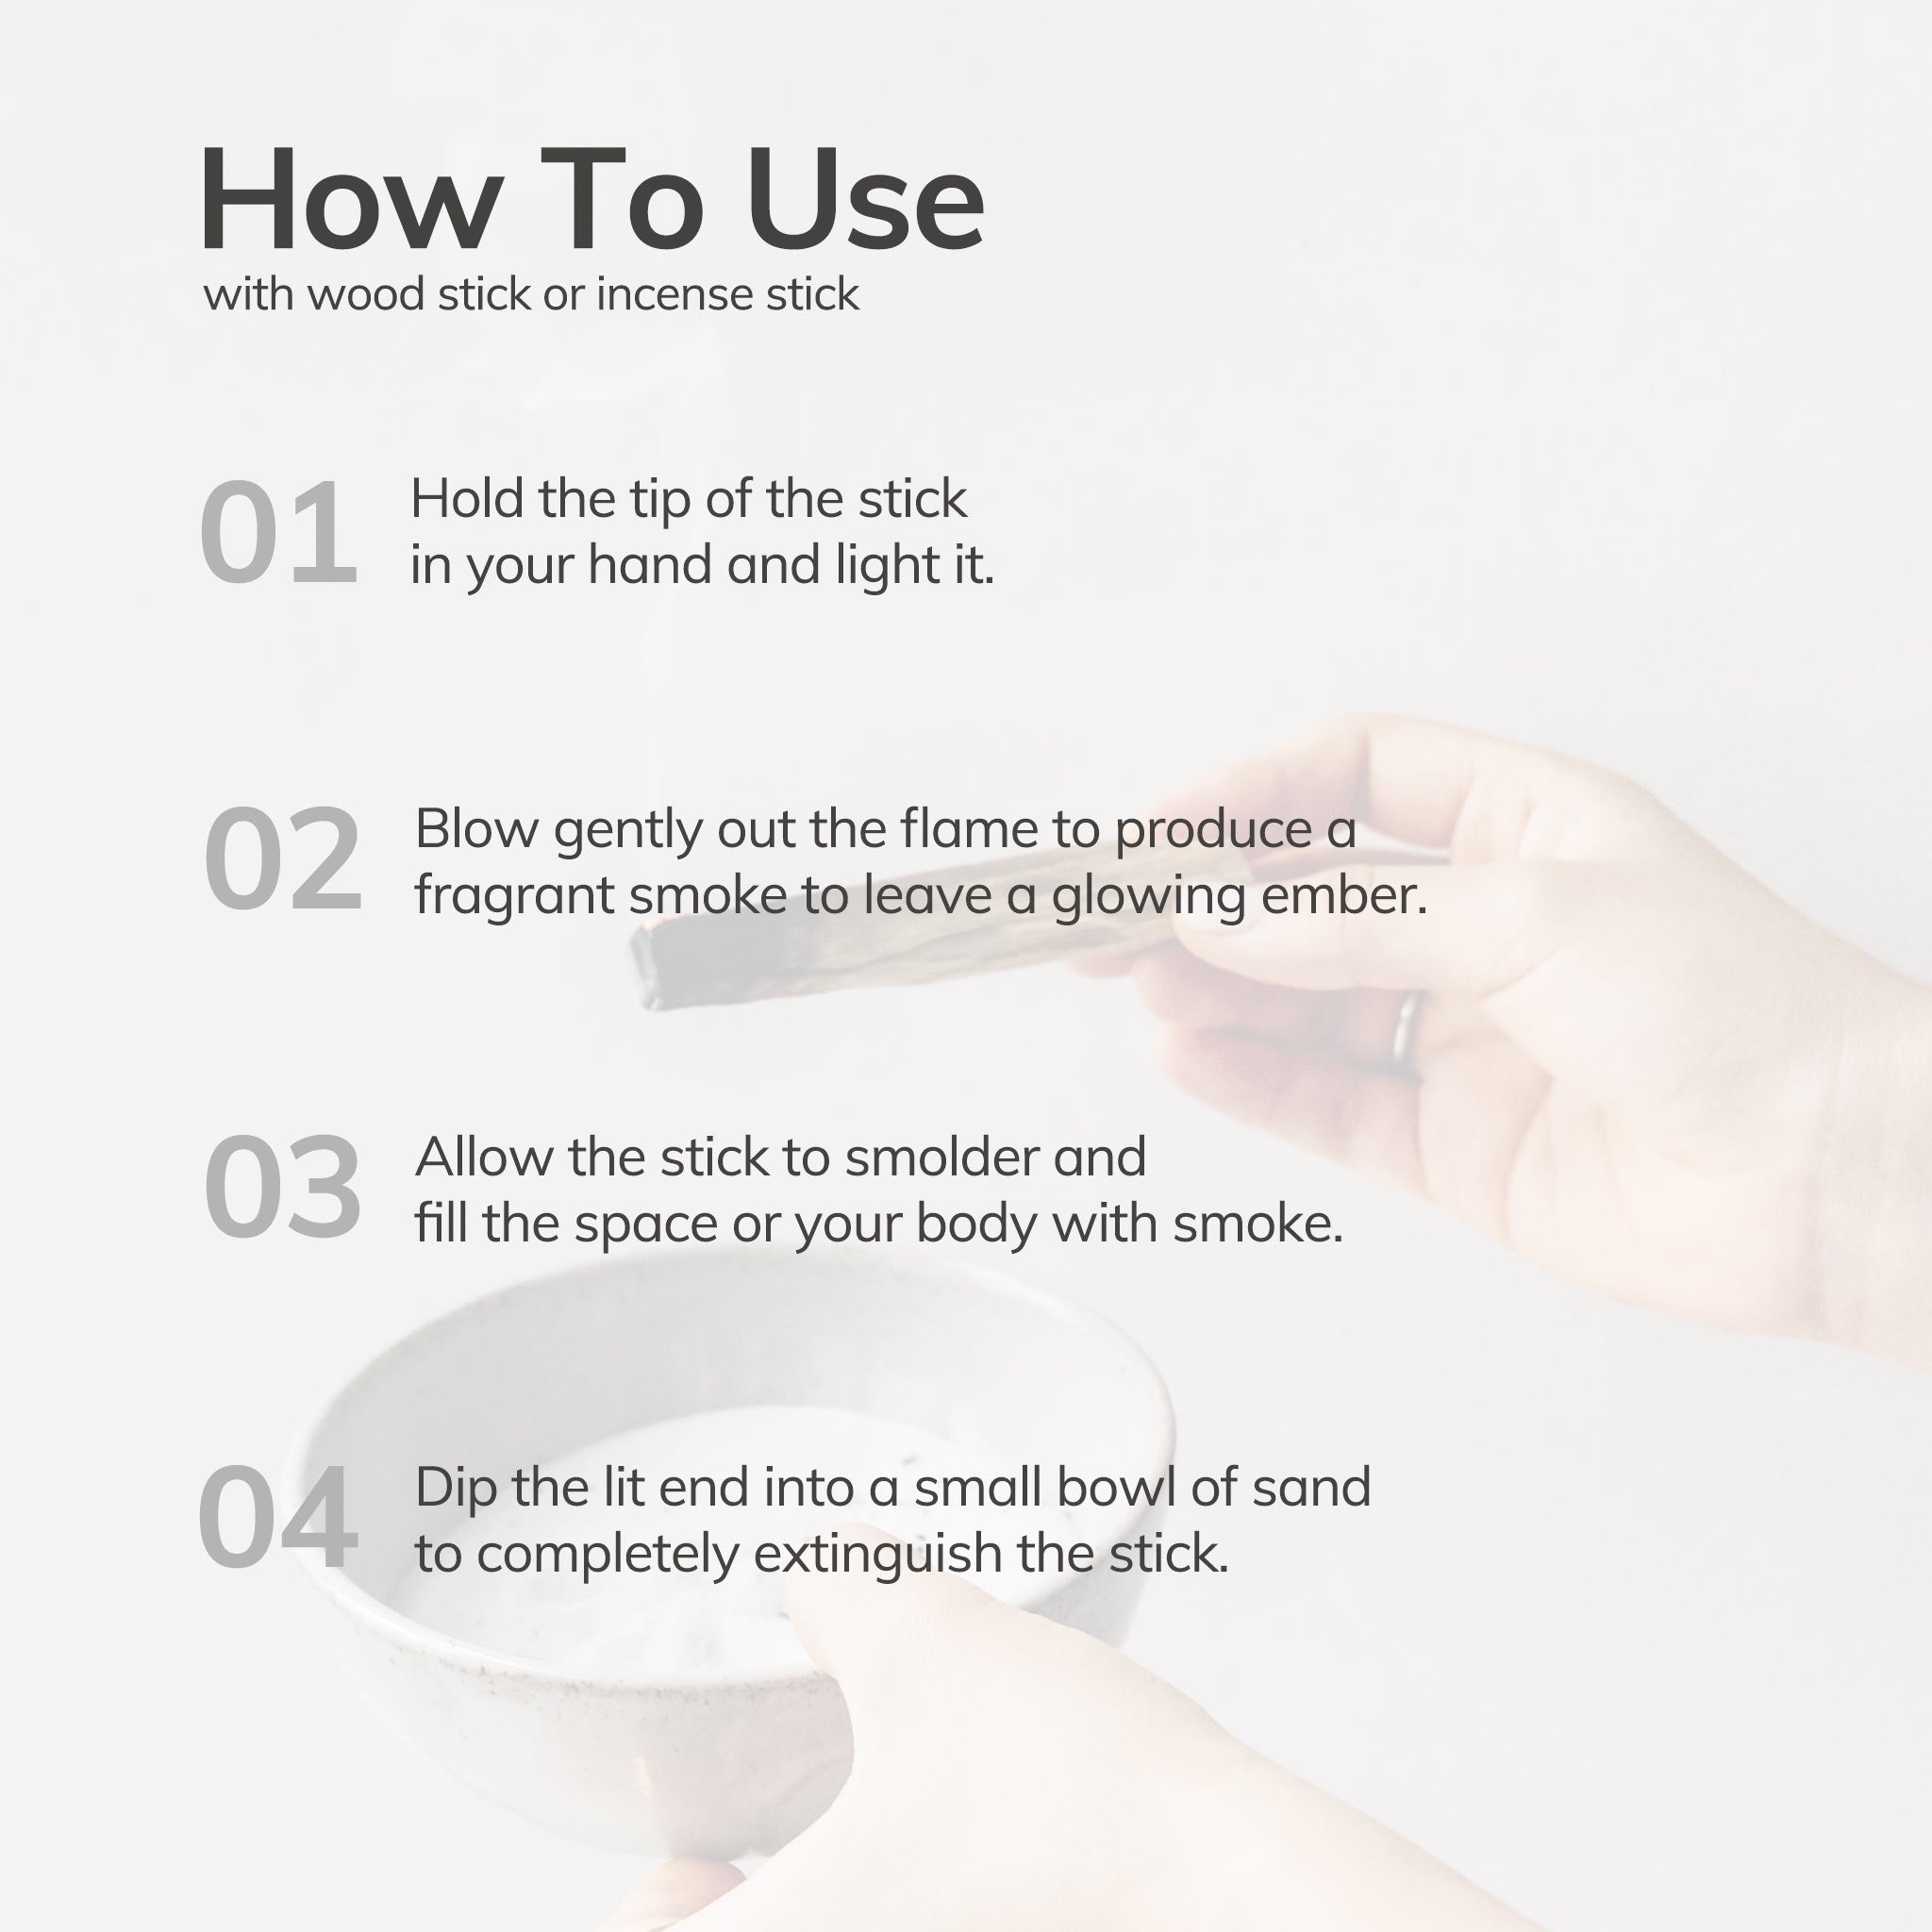 Chronological list of how to use with smudge stick or incense stick.